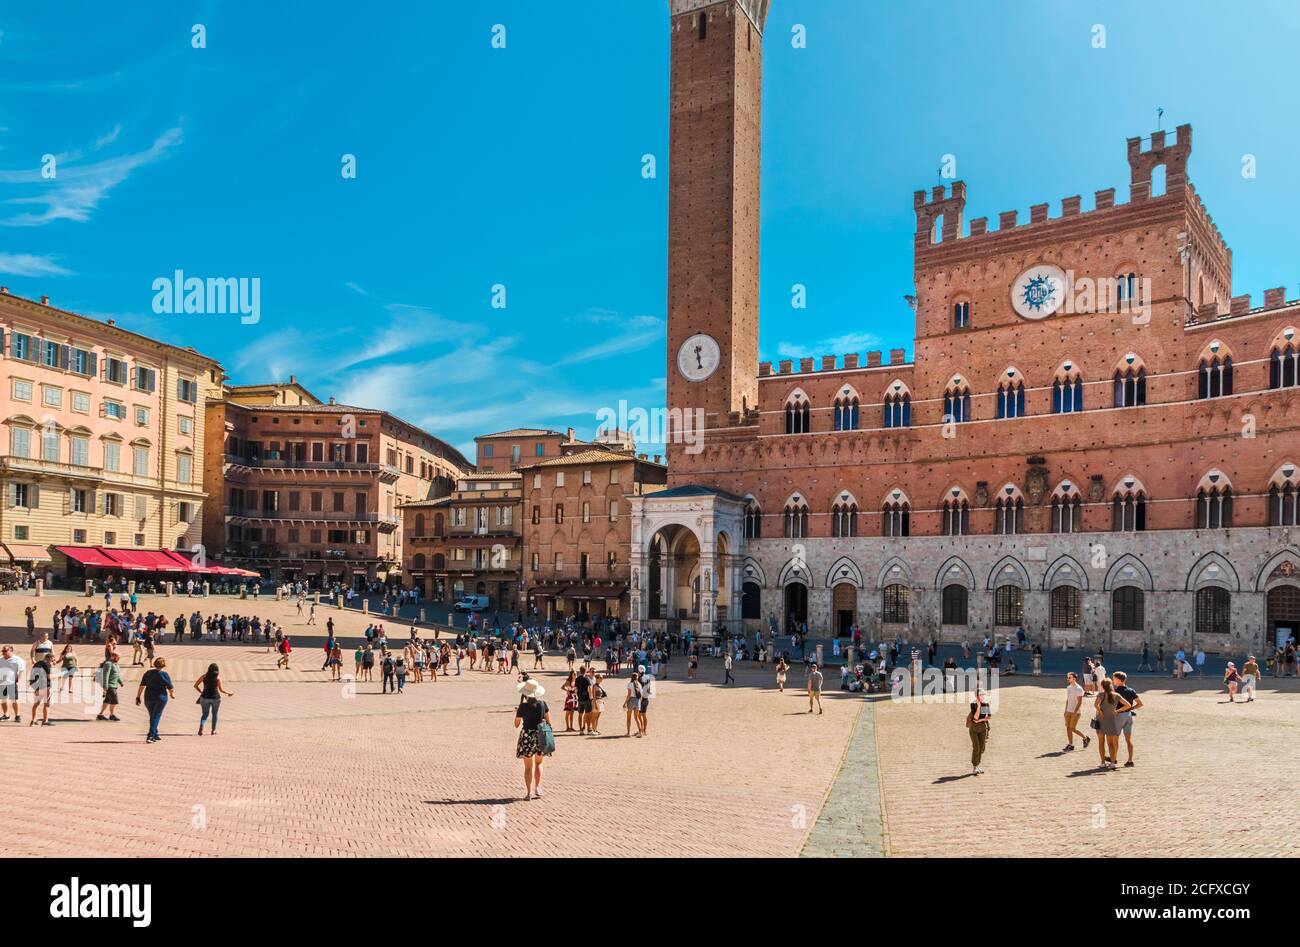 Great panoramic view of the famous town hall Palazzo Pubblico with the Cappella di Piazza in the historic main square Piazza del Campo on a sunny day... Stock Photo